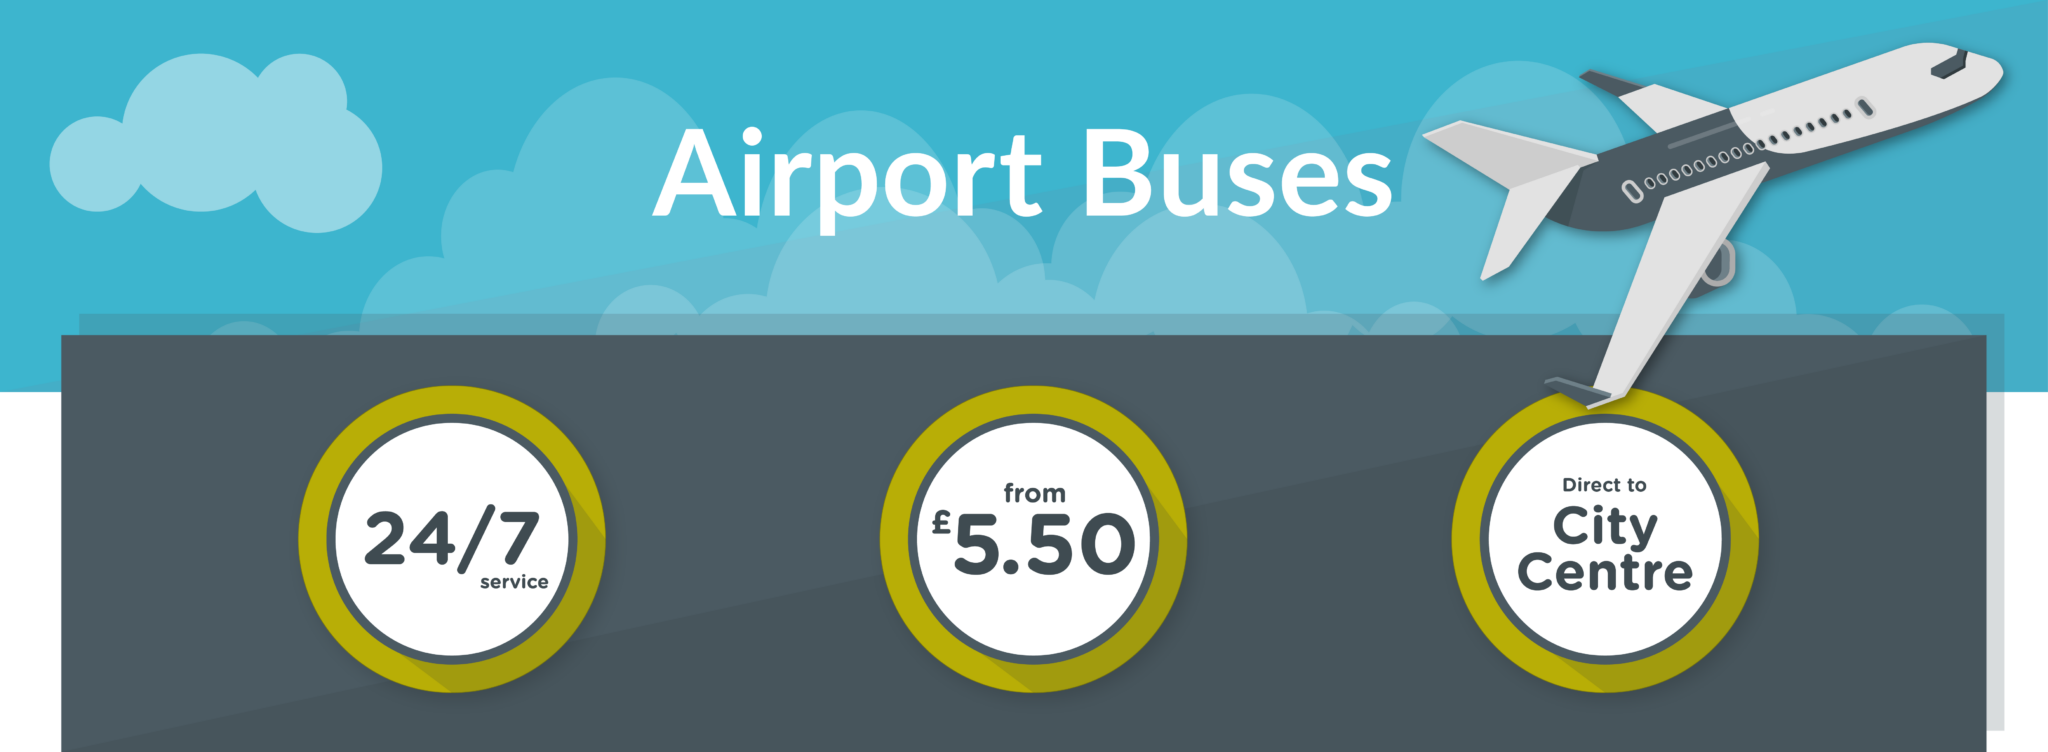 Airport Buses - 24/7 service, prices from £5.50, direct to city centre